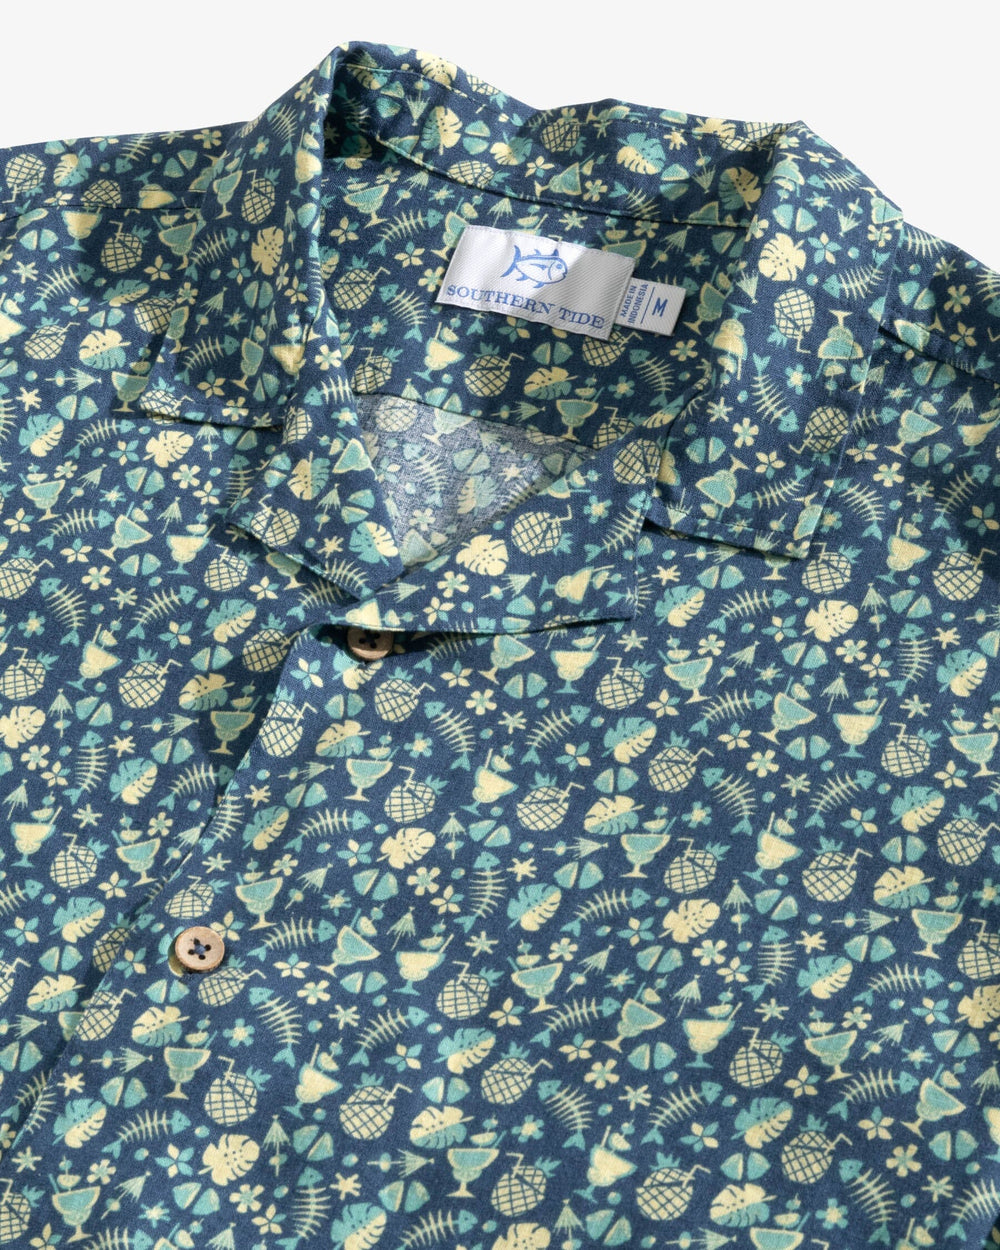 The detail view of the Southern Tide Bad and Boozy Camp Short Sleeve Button Down Sport Shirt by Southern Tide - Aged Denim